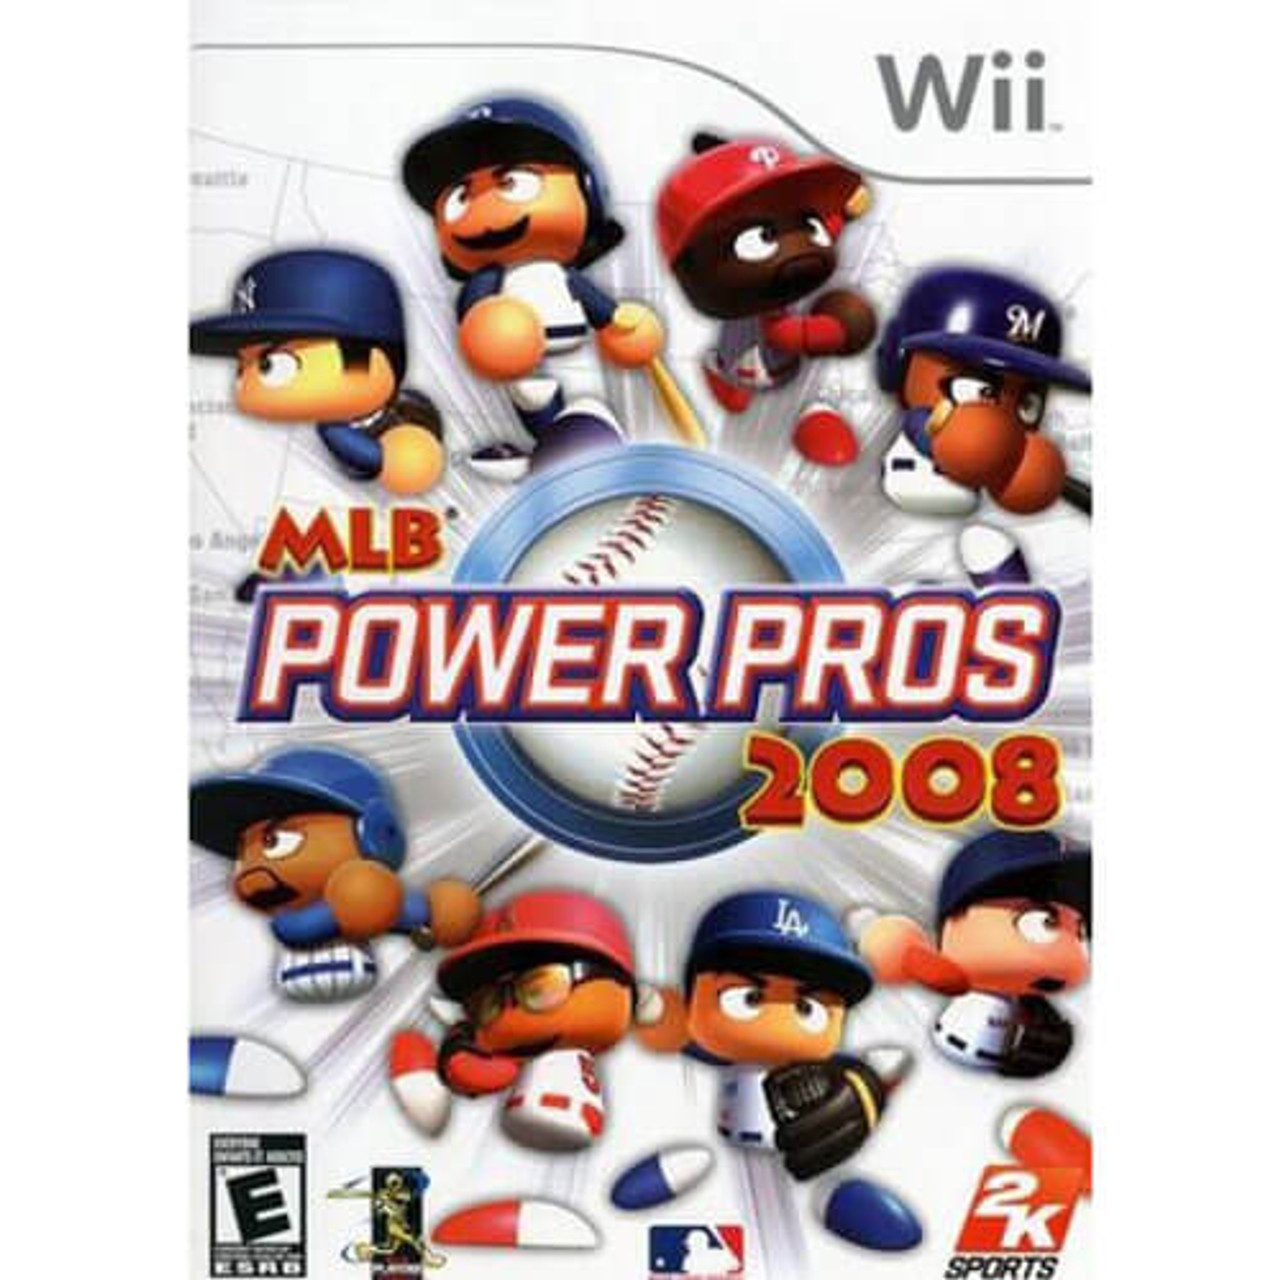 mlb power pros wii classic